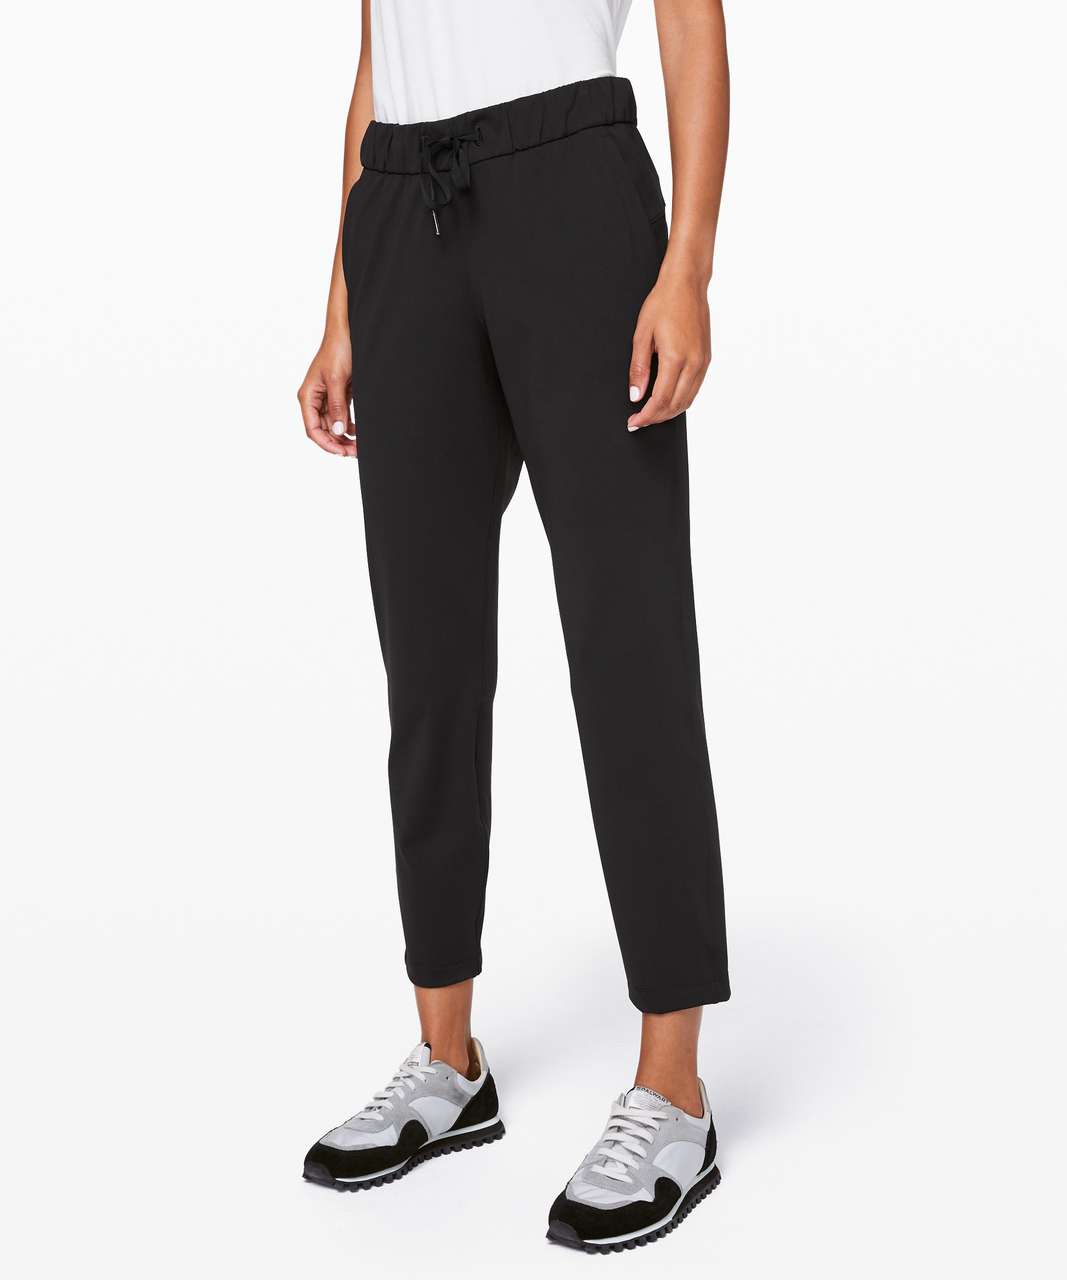 Lululemon On The Fly 7/8 Pant Woven Dry